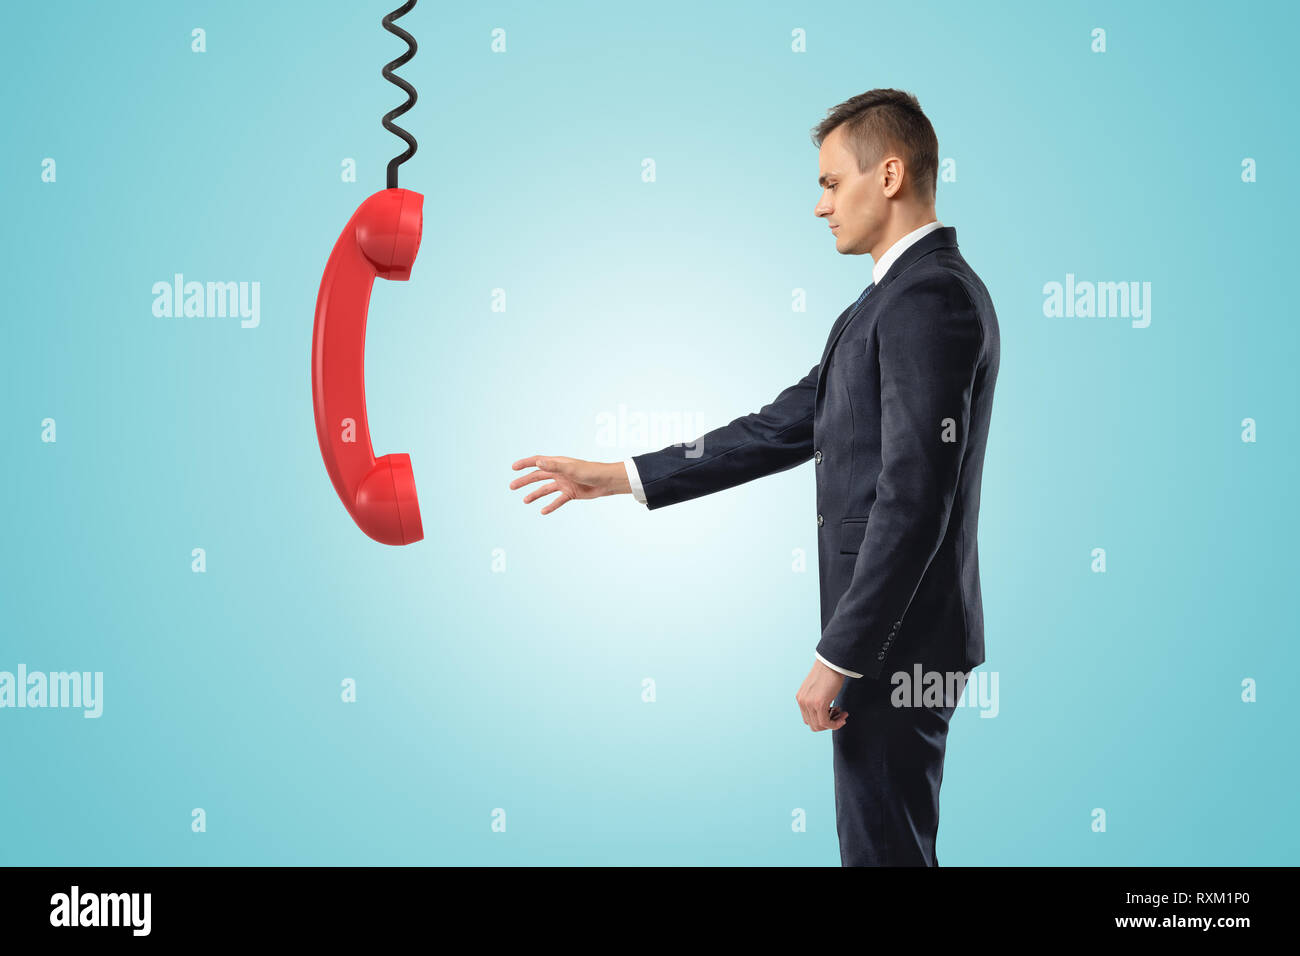 Side view of businessman standing and reaching out for big red landline phone receiver dangling down on wire from above. Stock Photo